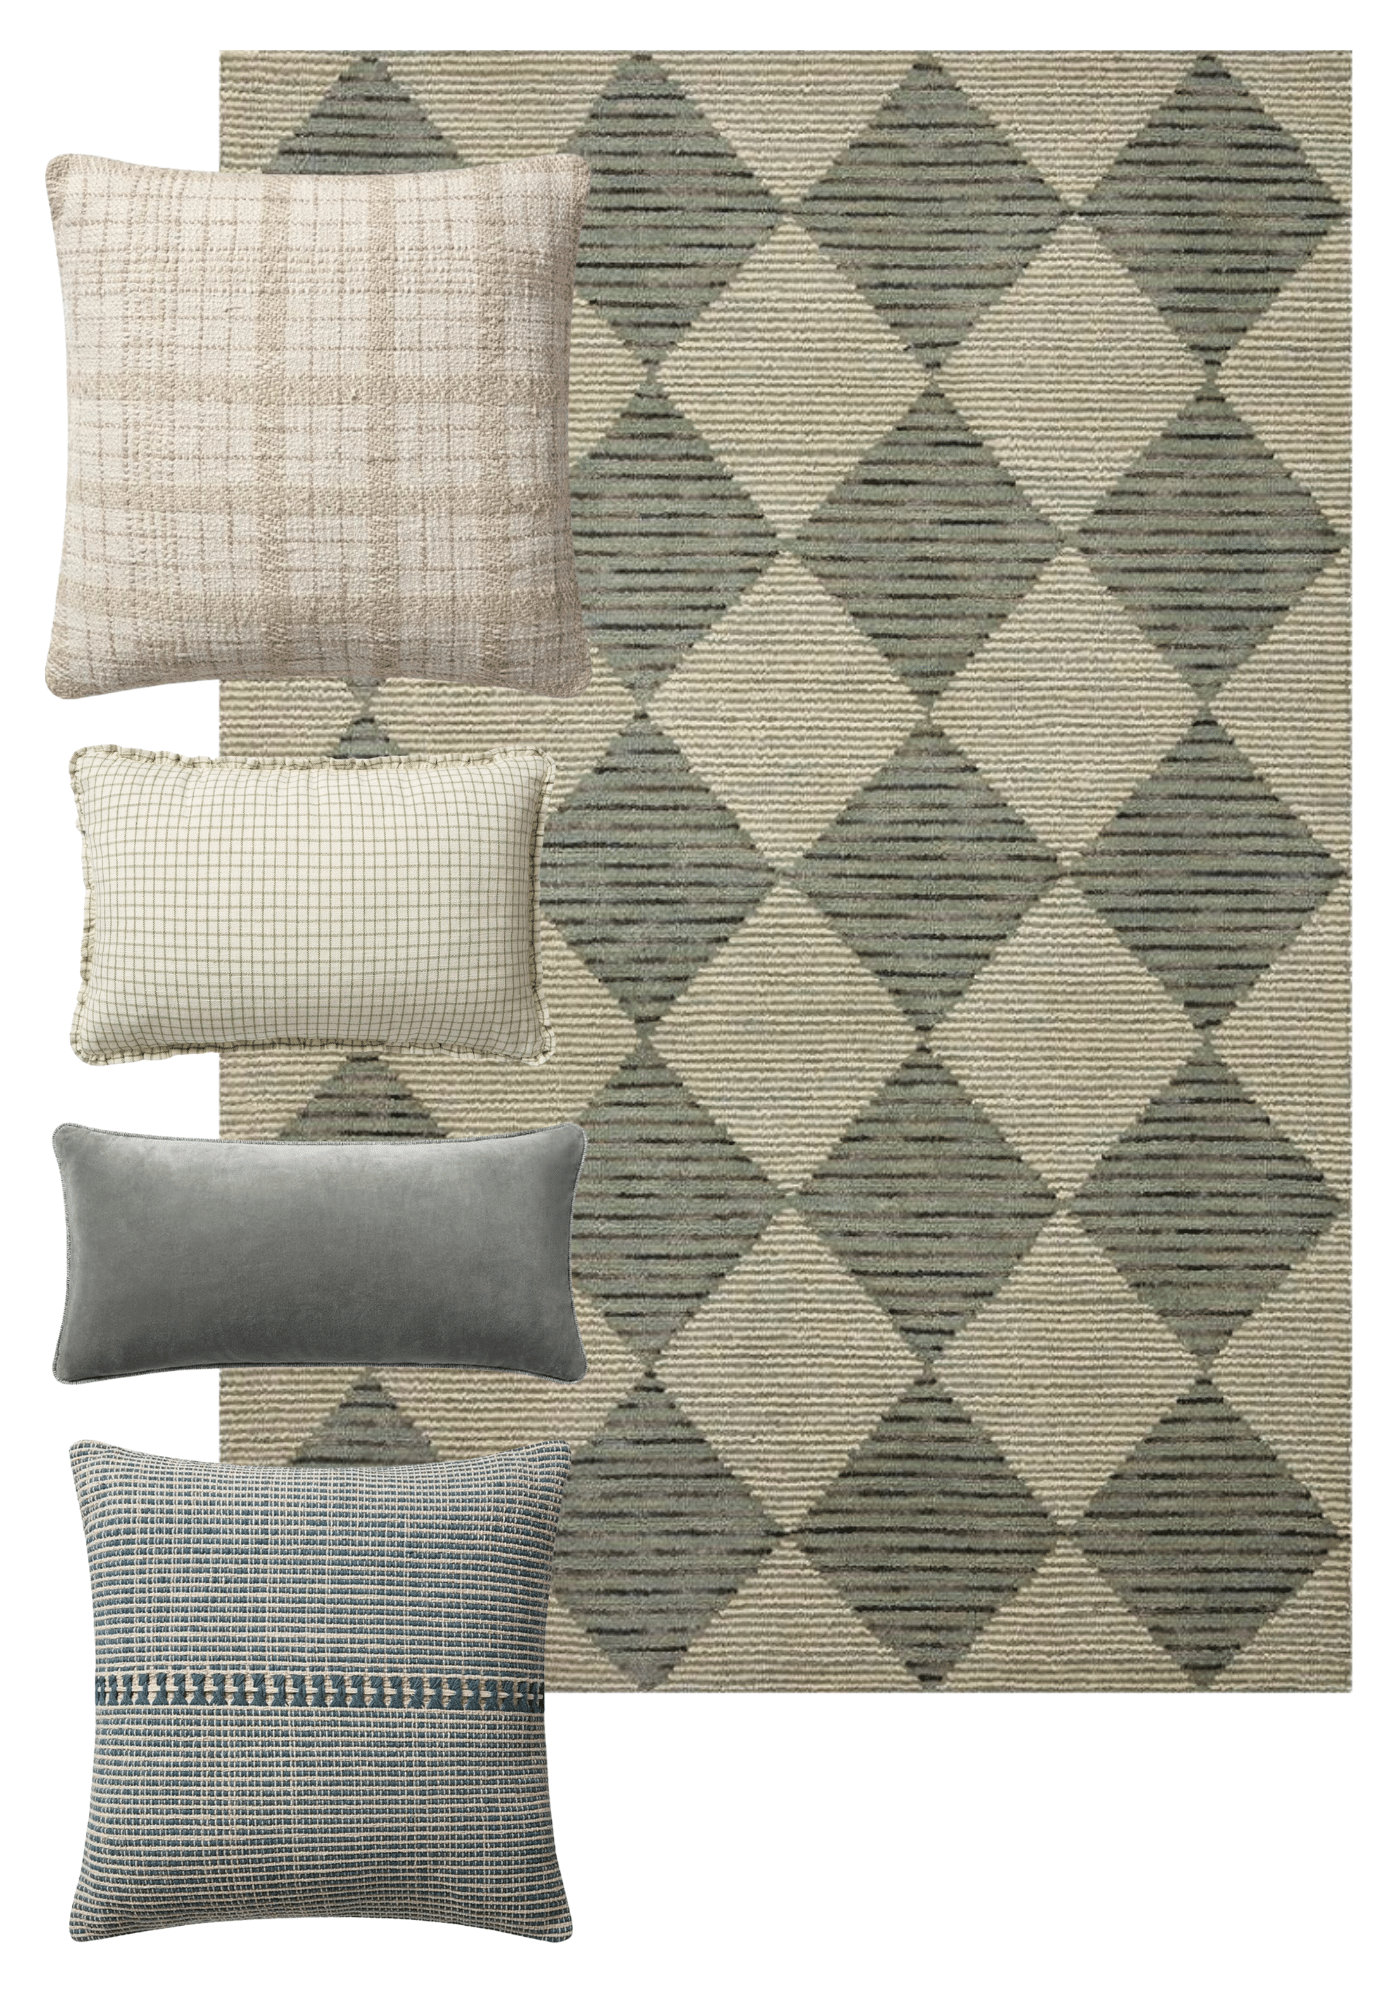 Chris Loves Julia My Favorite Pillow & Rug Pairings | Francis Rug with Pillows